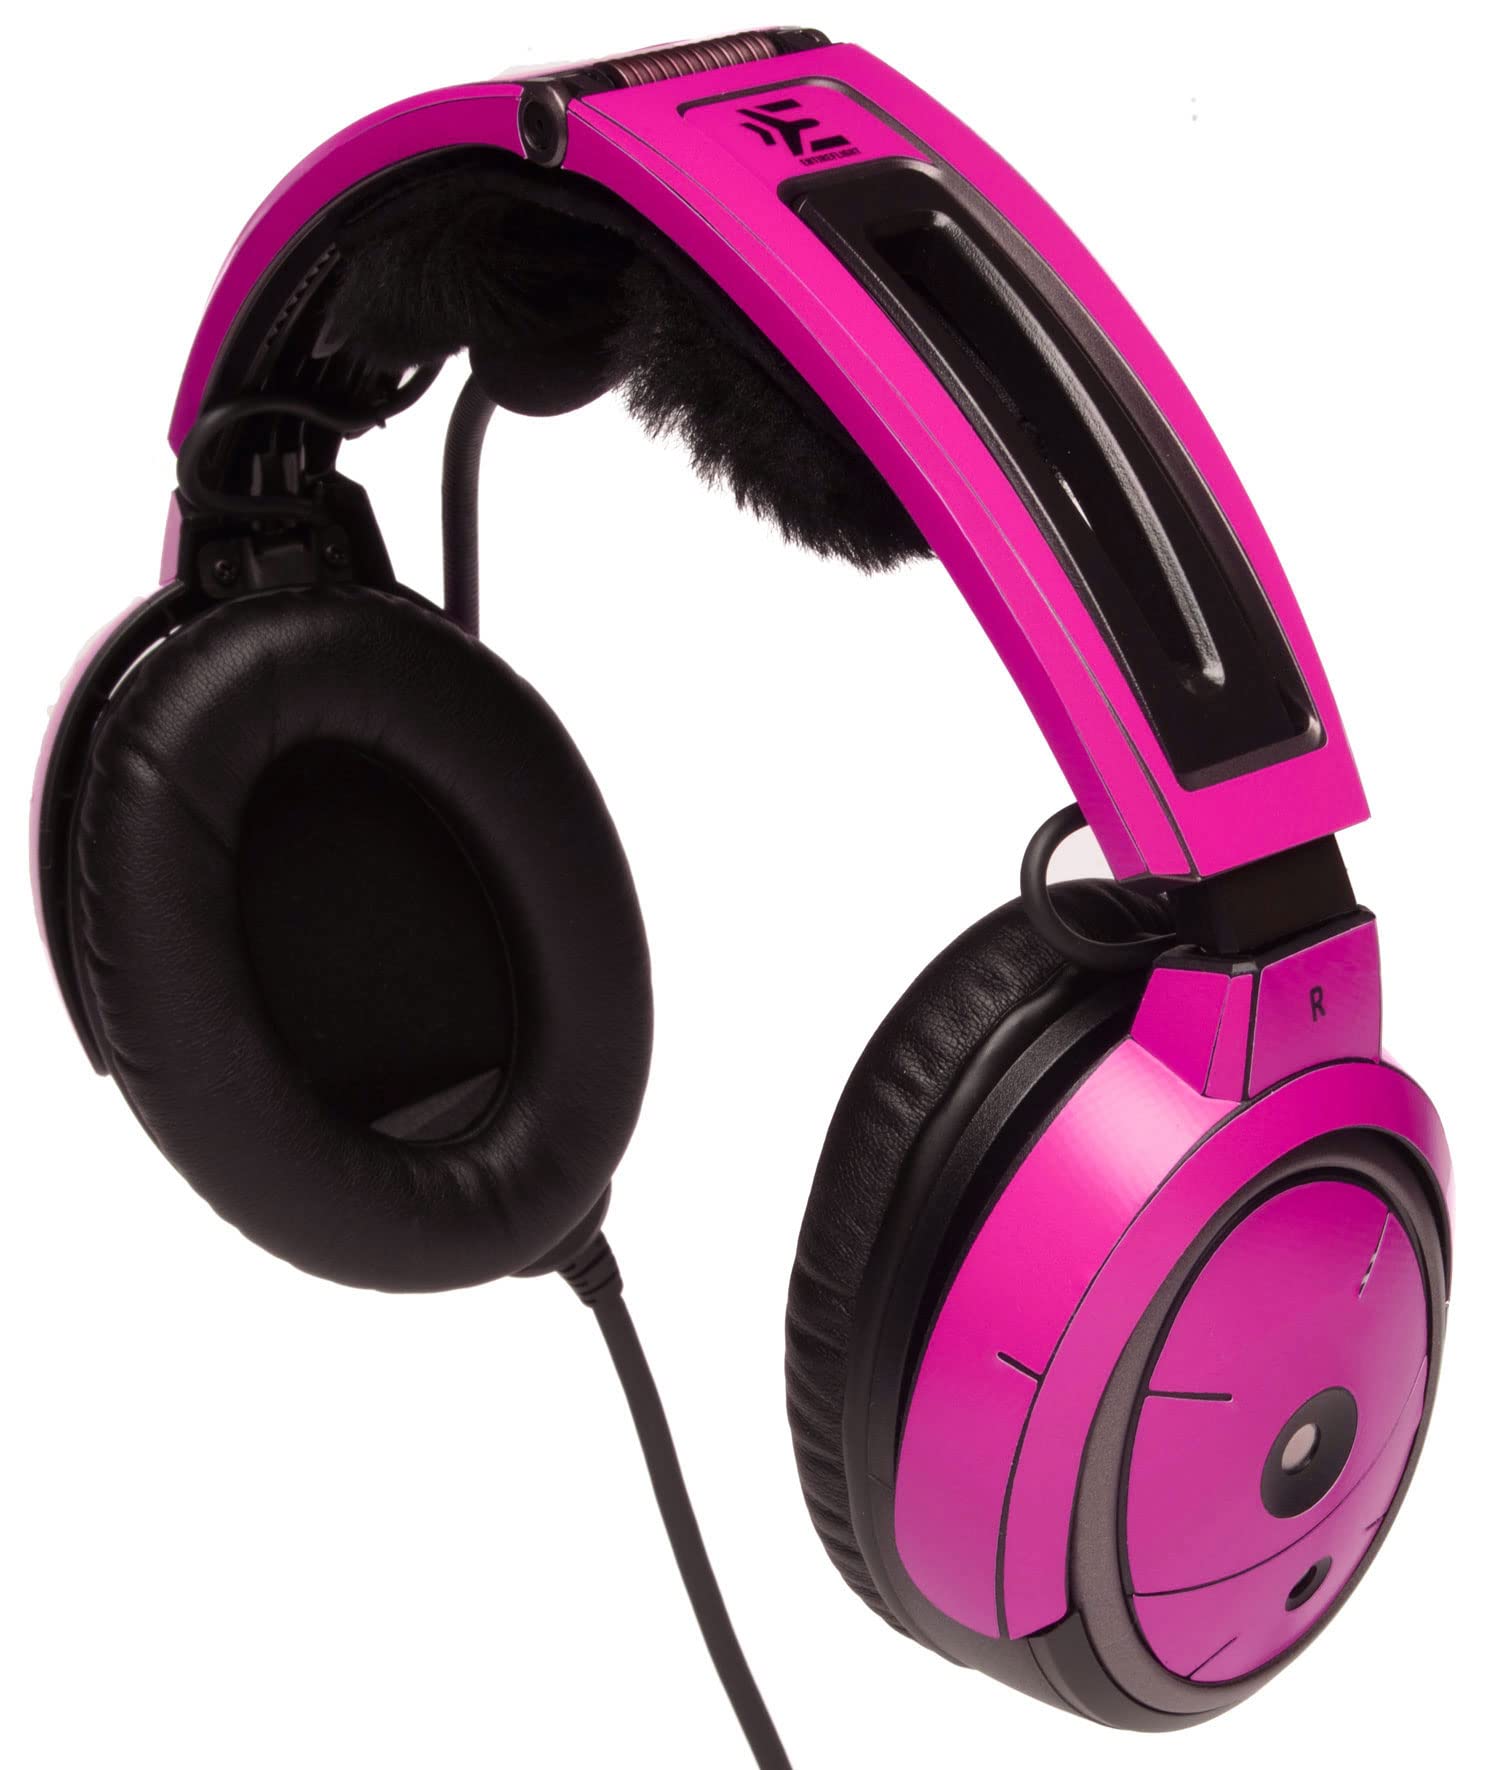 EntireFlight Alpha 20 Flight Skins-Personalization Decals for Your Bose Aviation Headset-Works with All Bose A20 Noise Canceling Headphones-Makes Great Pilot Gifts-Headphones Not Included(Pink)